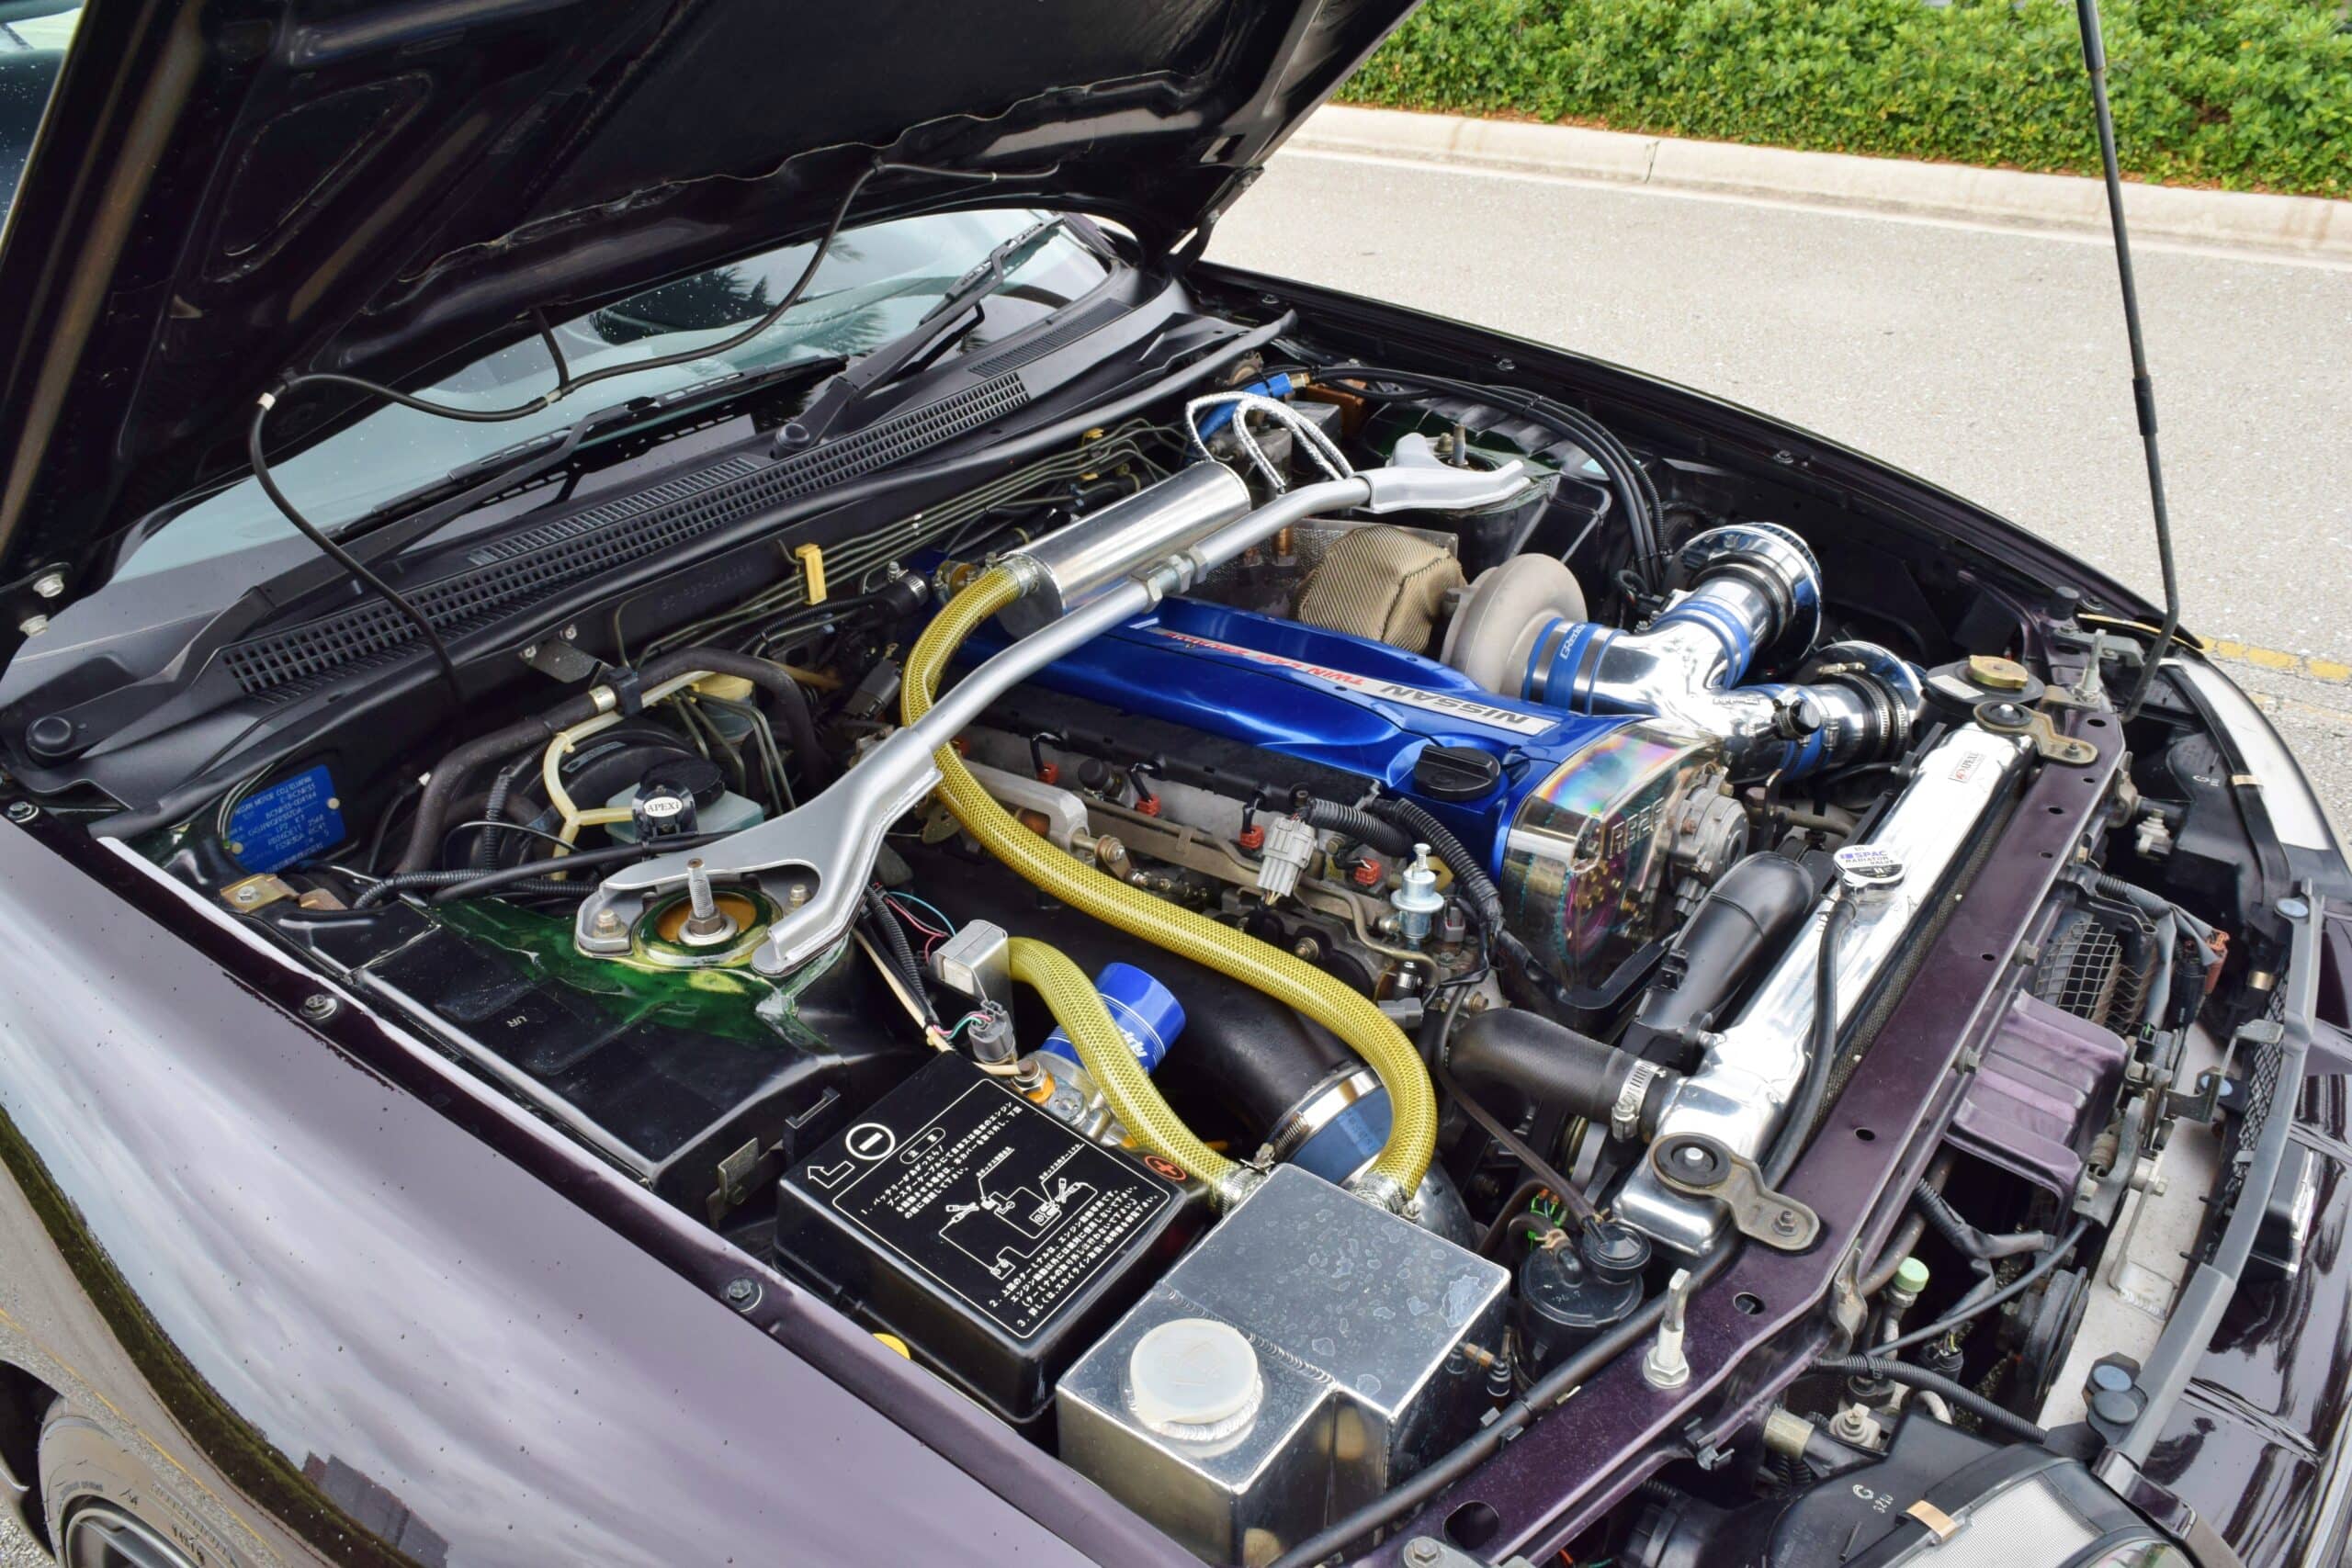 1995 Nissan GT-R R33 SKYLINE Midnight Purple-Single Turbo-550 AWHP -Only 37K Miles- SHOW CAR – Fully Sorted